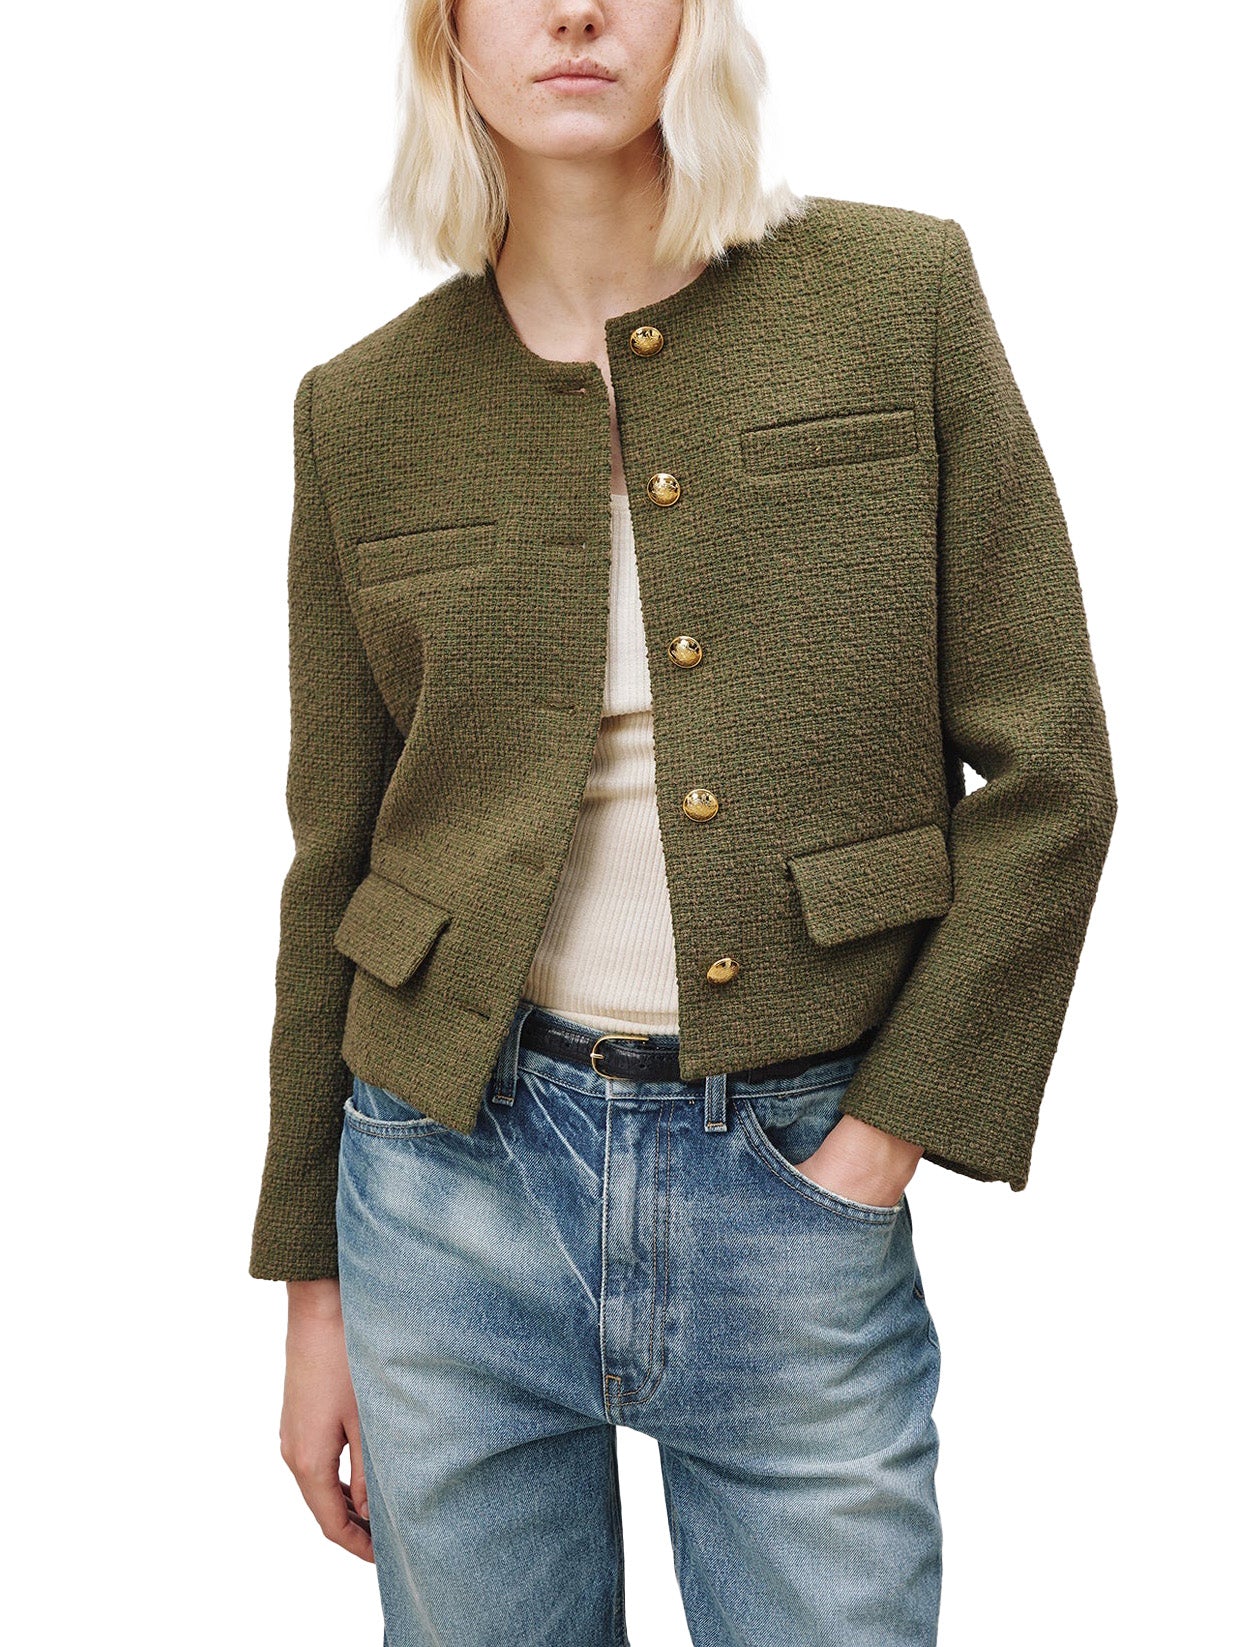 Paige Jacket in Army Green